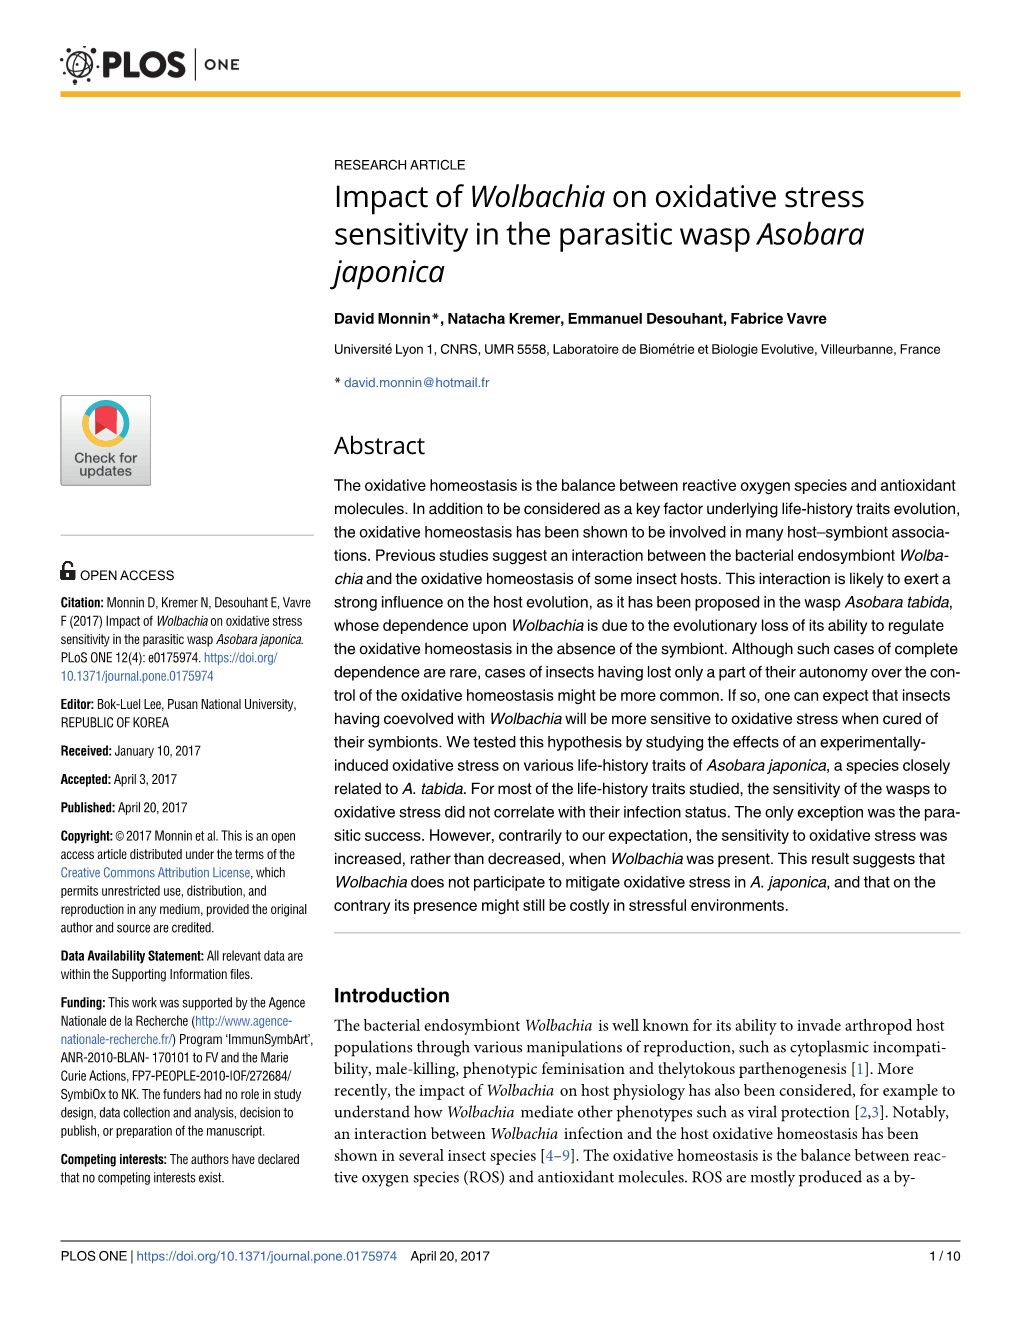 Impact of Wolbachia on Oxidative Stress Sensitivity in the Parasitic Wasp Asobara Japonica